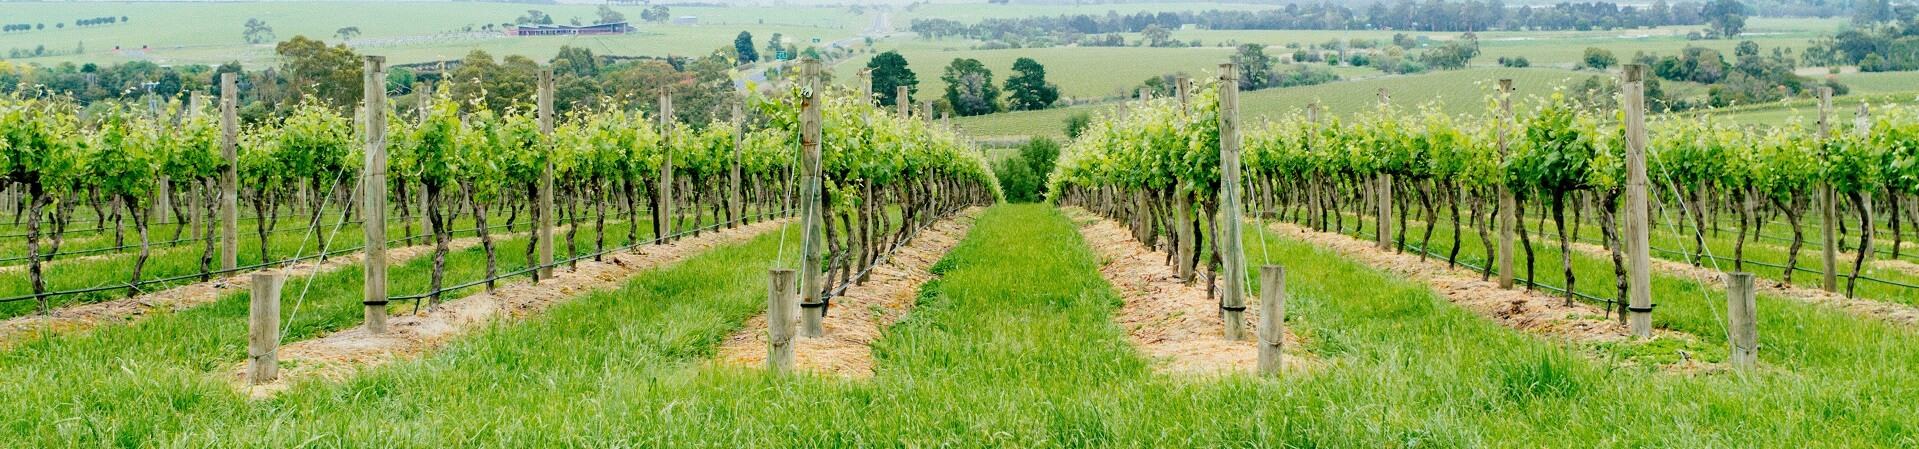 What is there to do in the Yarra Valley this weekend?